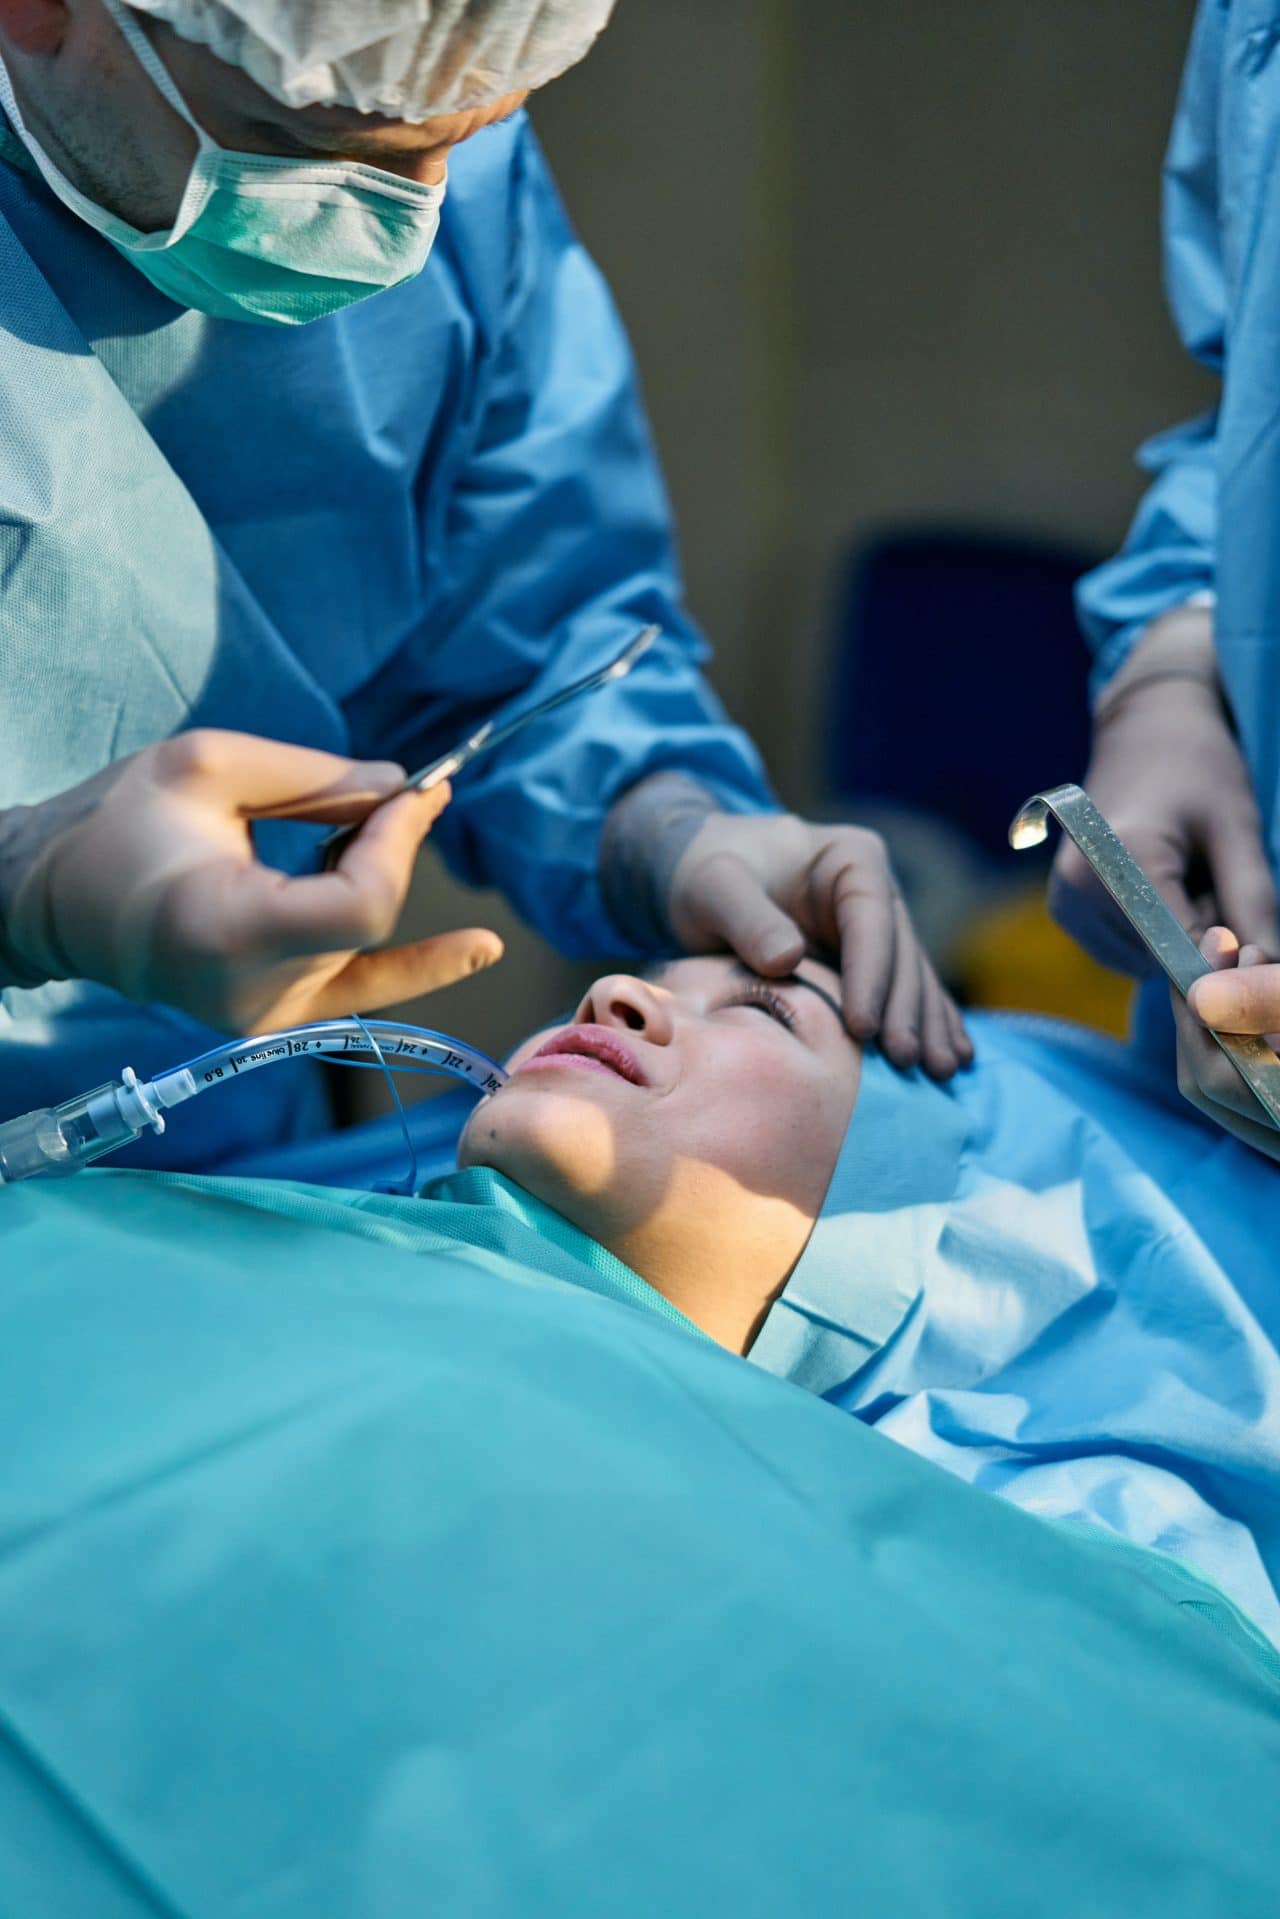 Surgeon abou to perform plastic surgery on patient.